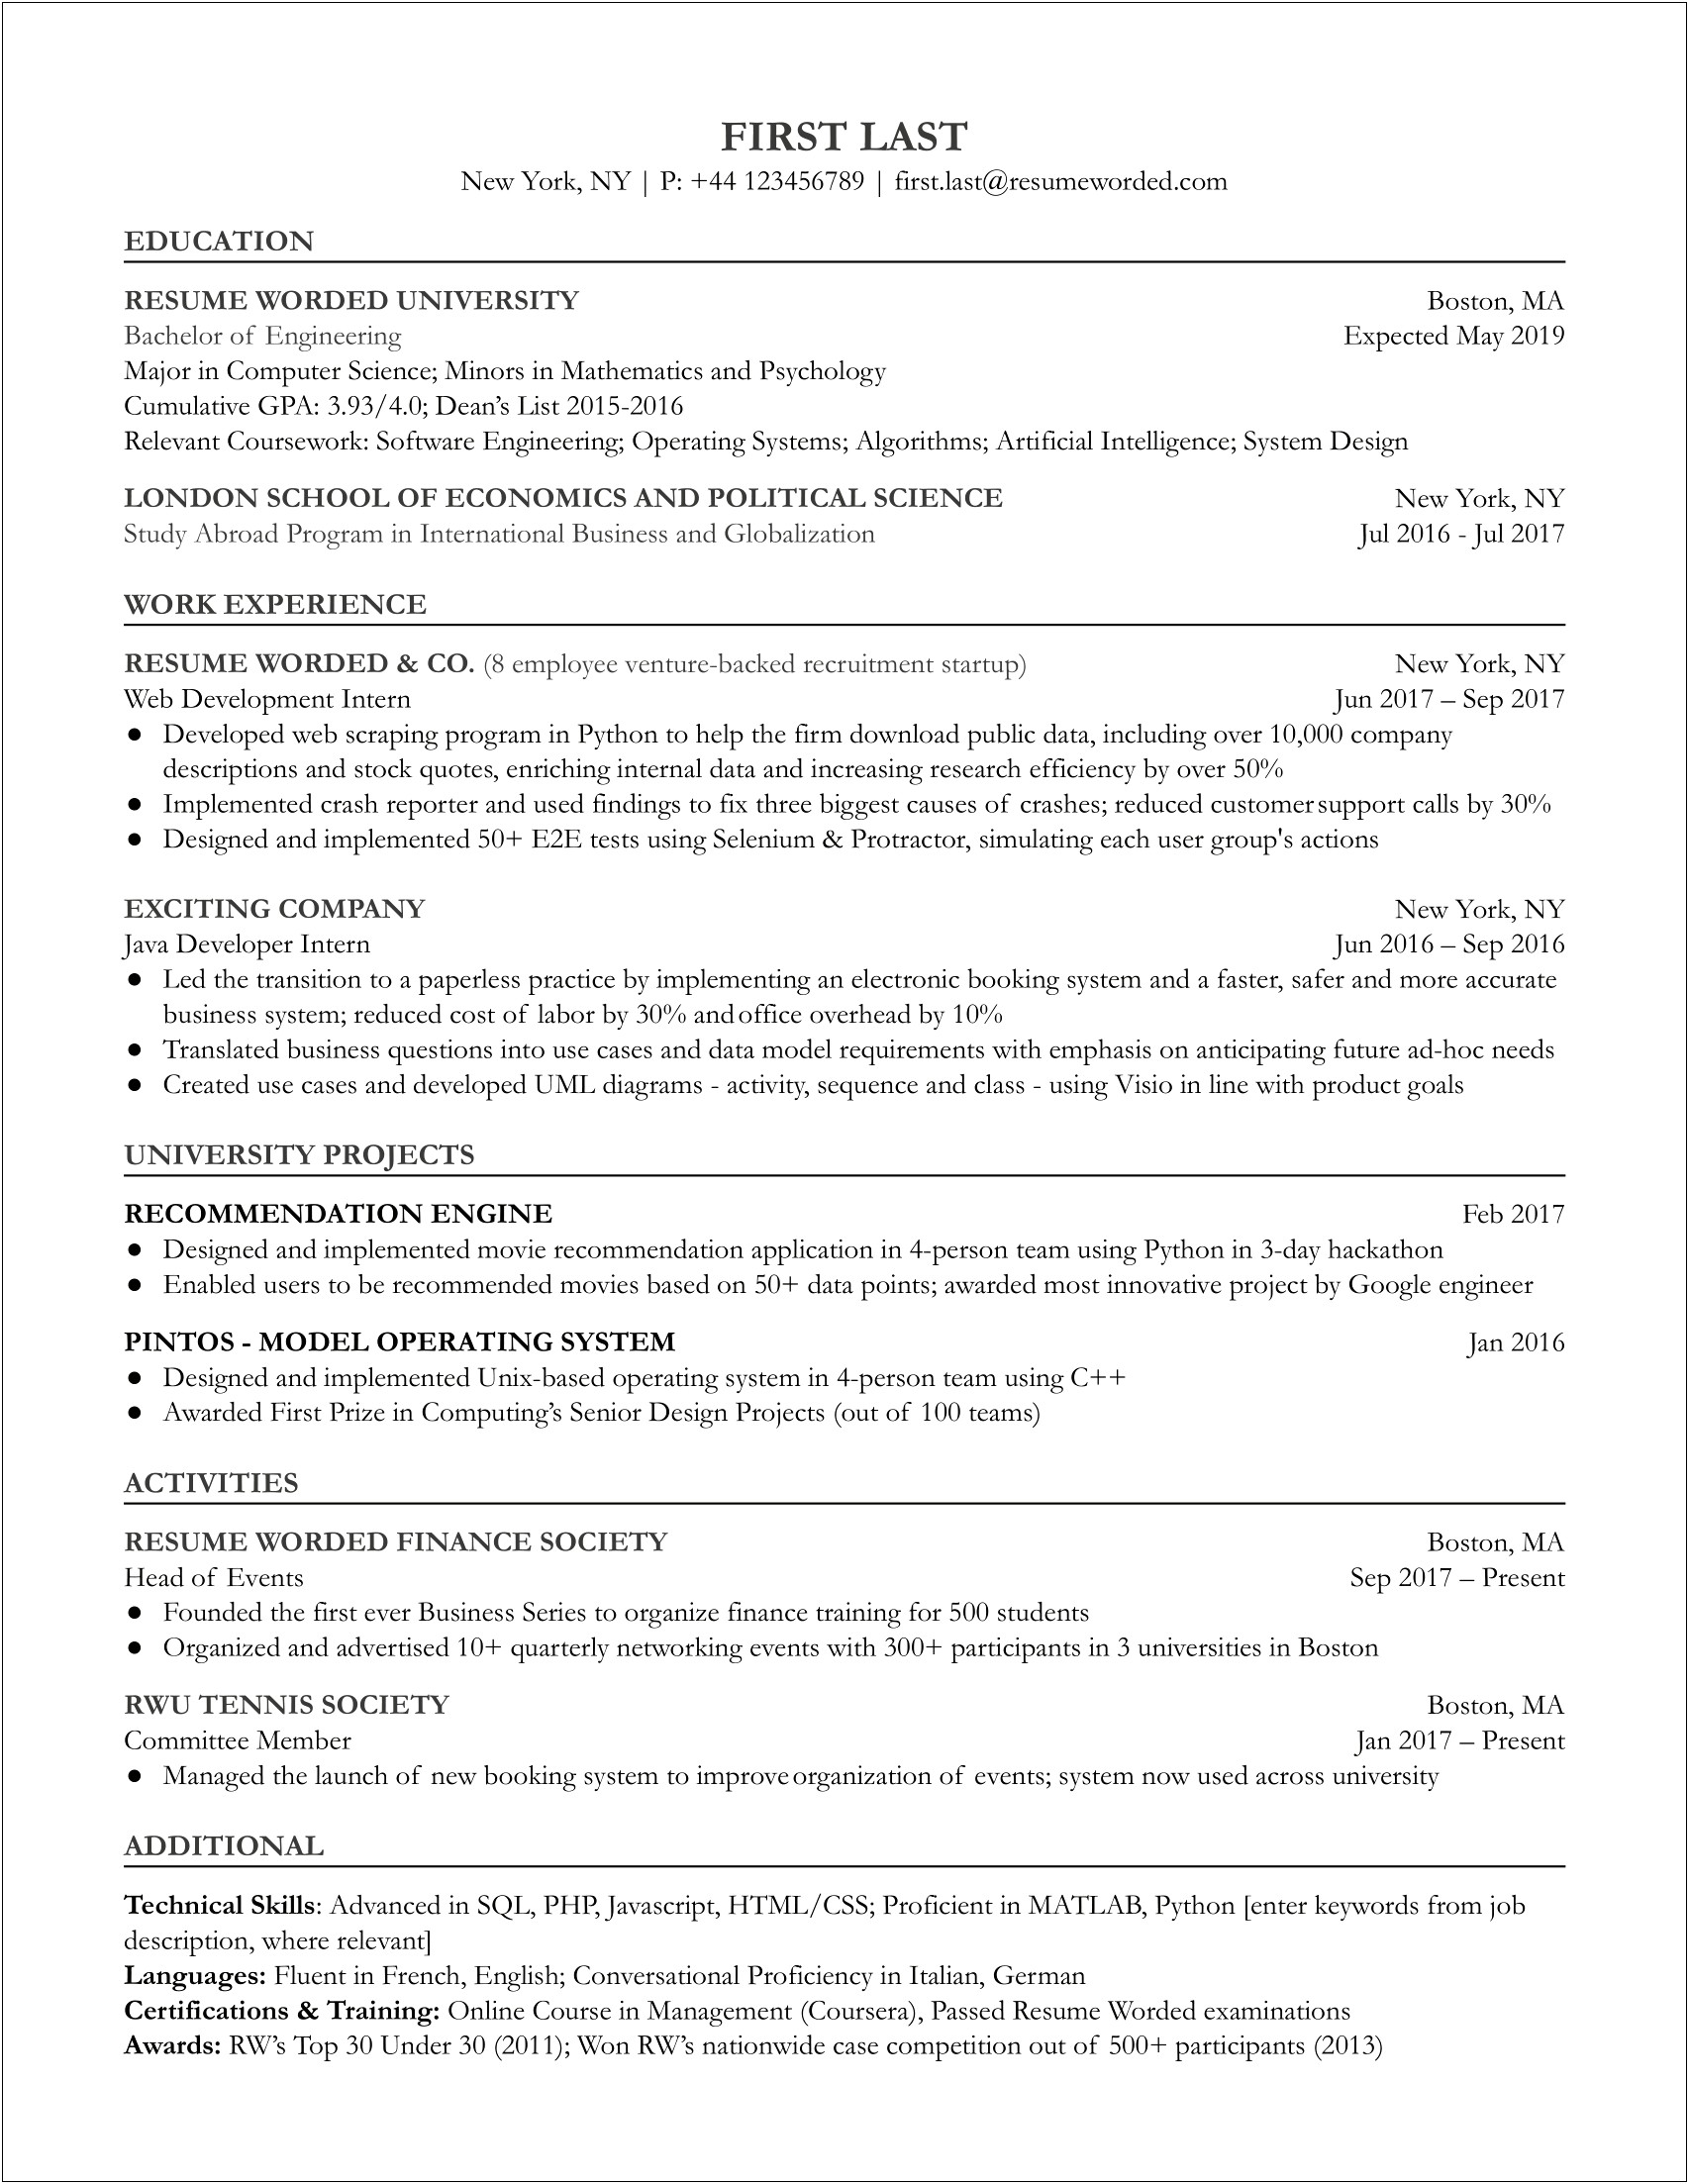 Putting Operating System As A Resume Skill